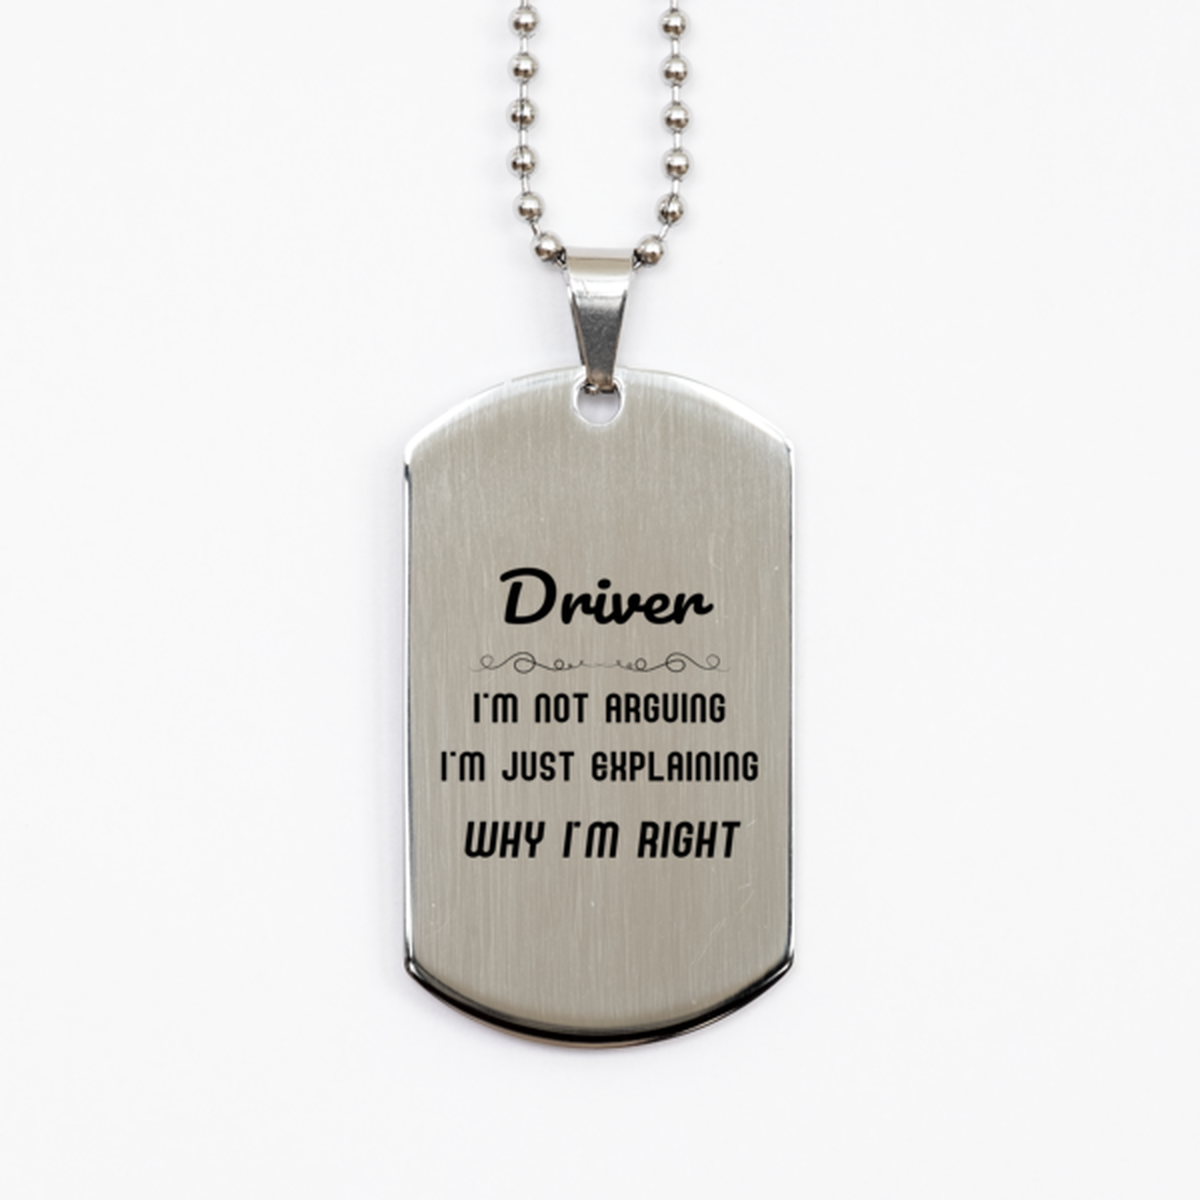 Driver I'm not Arguing. I'm Just Explaining Why I'm RIGHT Silver Dog Tag, Funny Saying Quote Driver Gifts For Driver Graduation Birthday Christmas Gifts for Men Women Coworker